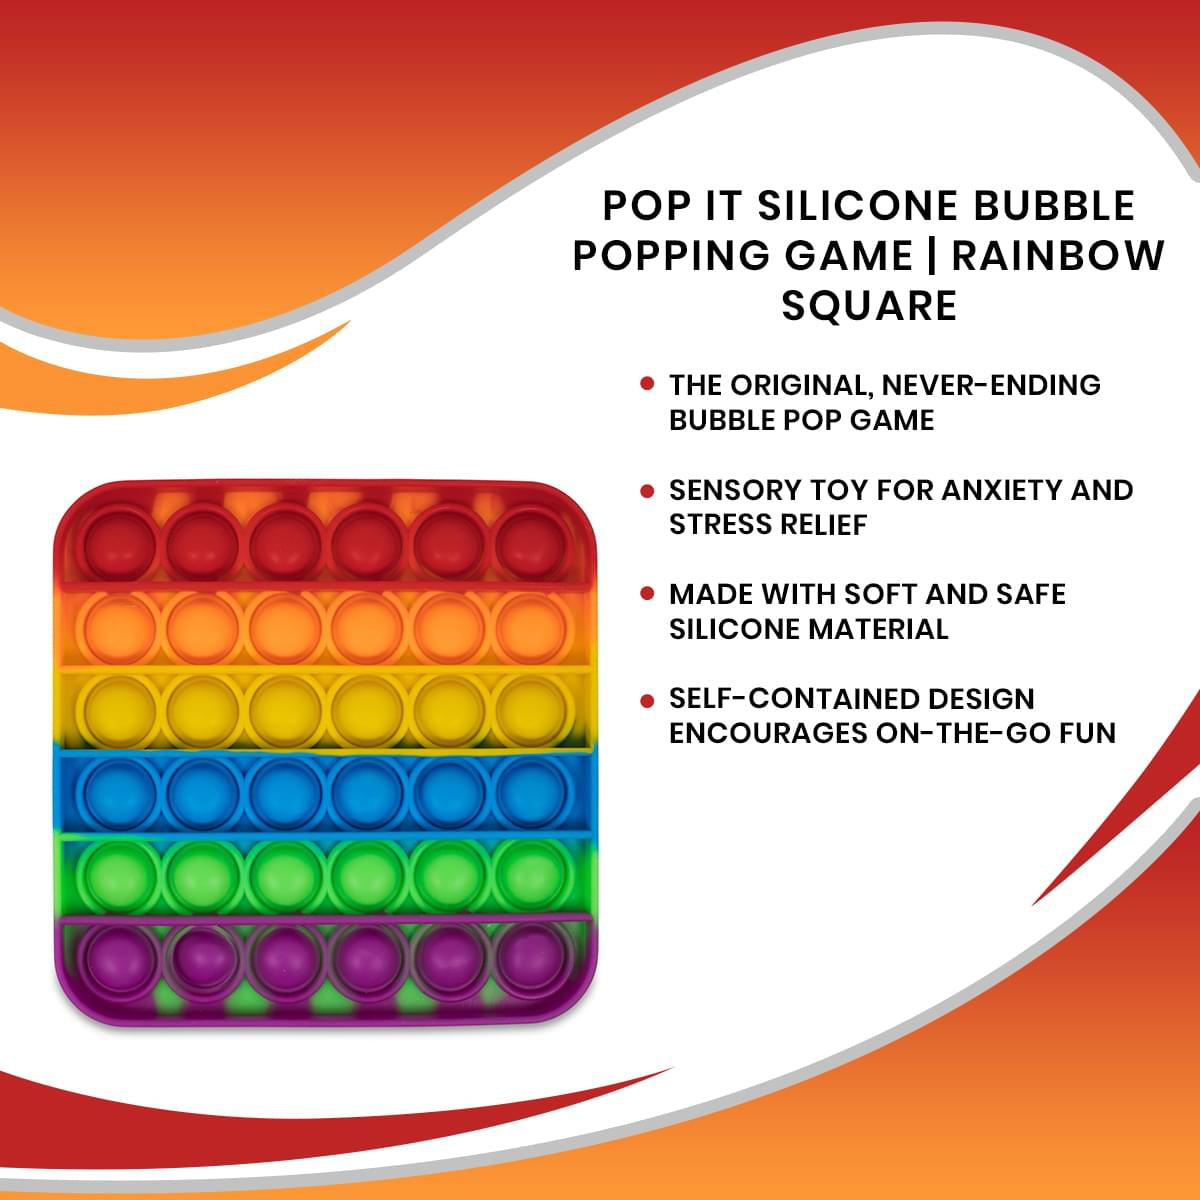 Pop Fidget Toy Silicone Bubble Popping Game | Rainbow Square